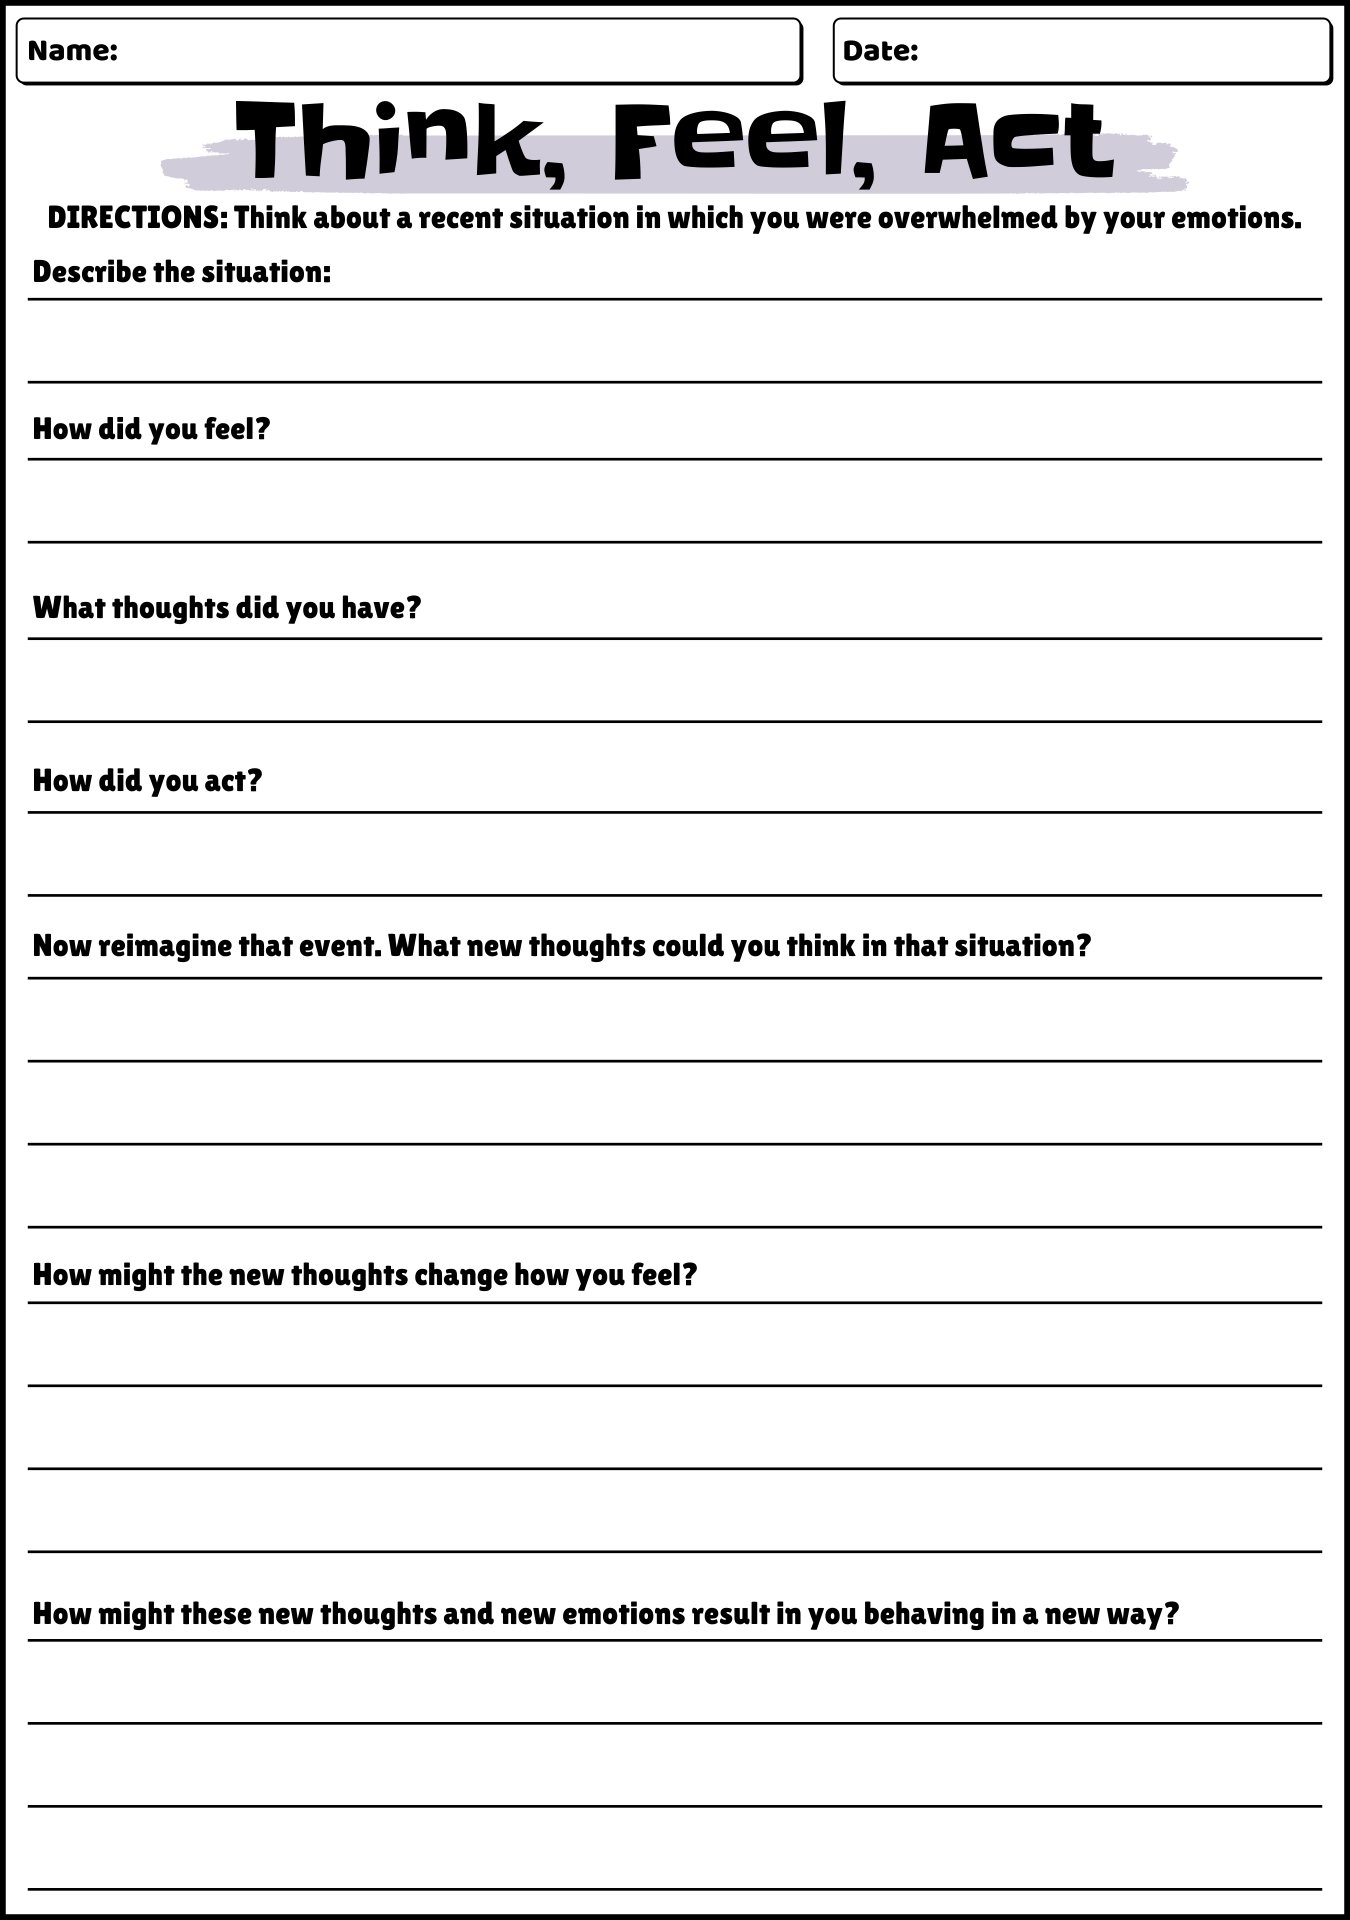 15 Best Images of Cognitive Therapy Worksheets  Cognitive Behavioral Therapy Worksheets 